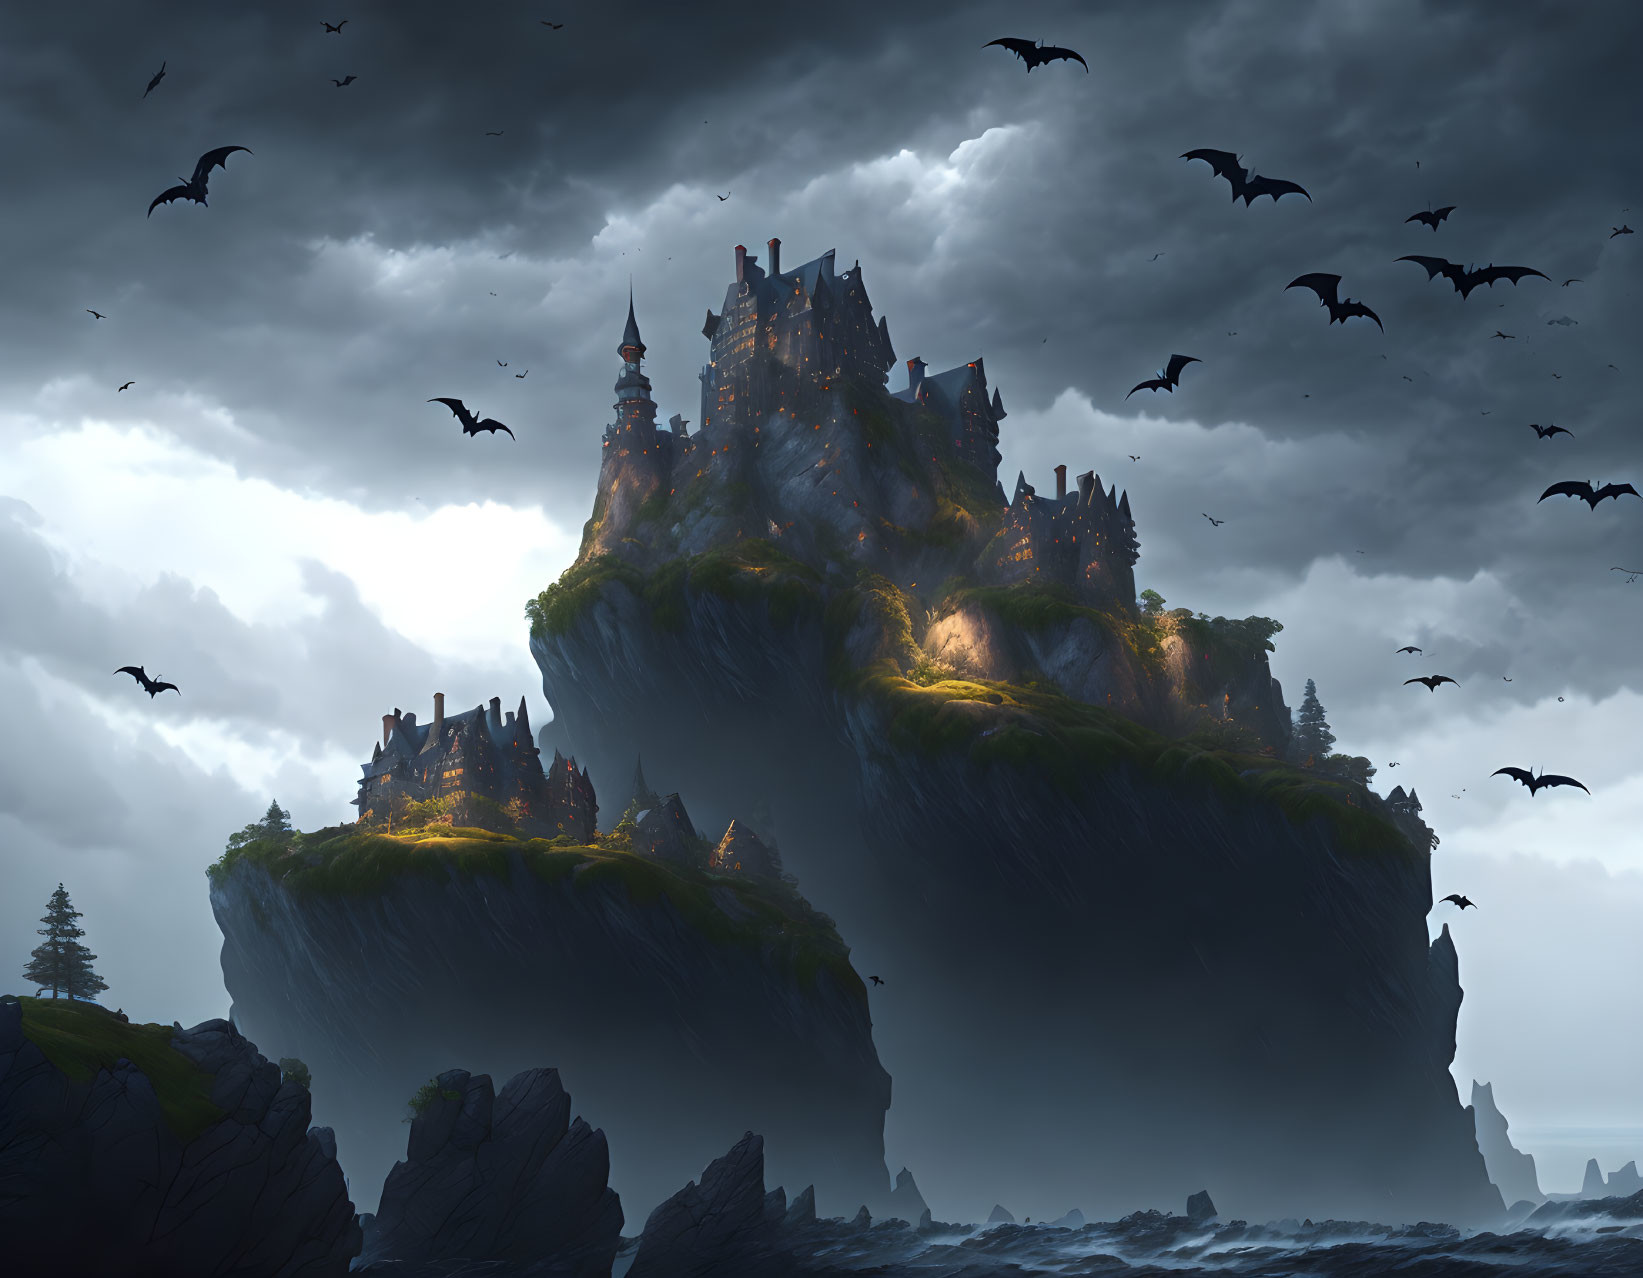 Foreboding castle on craggy cliff under stormy sky with bats.